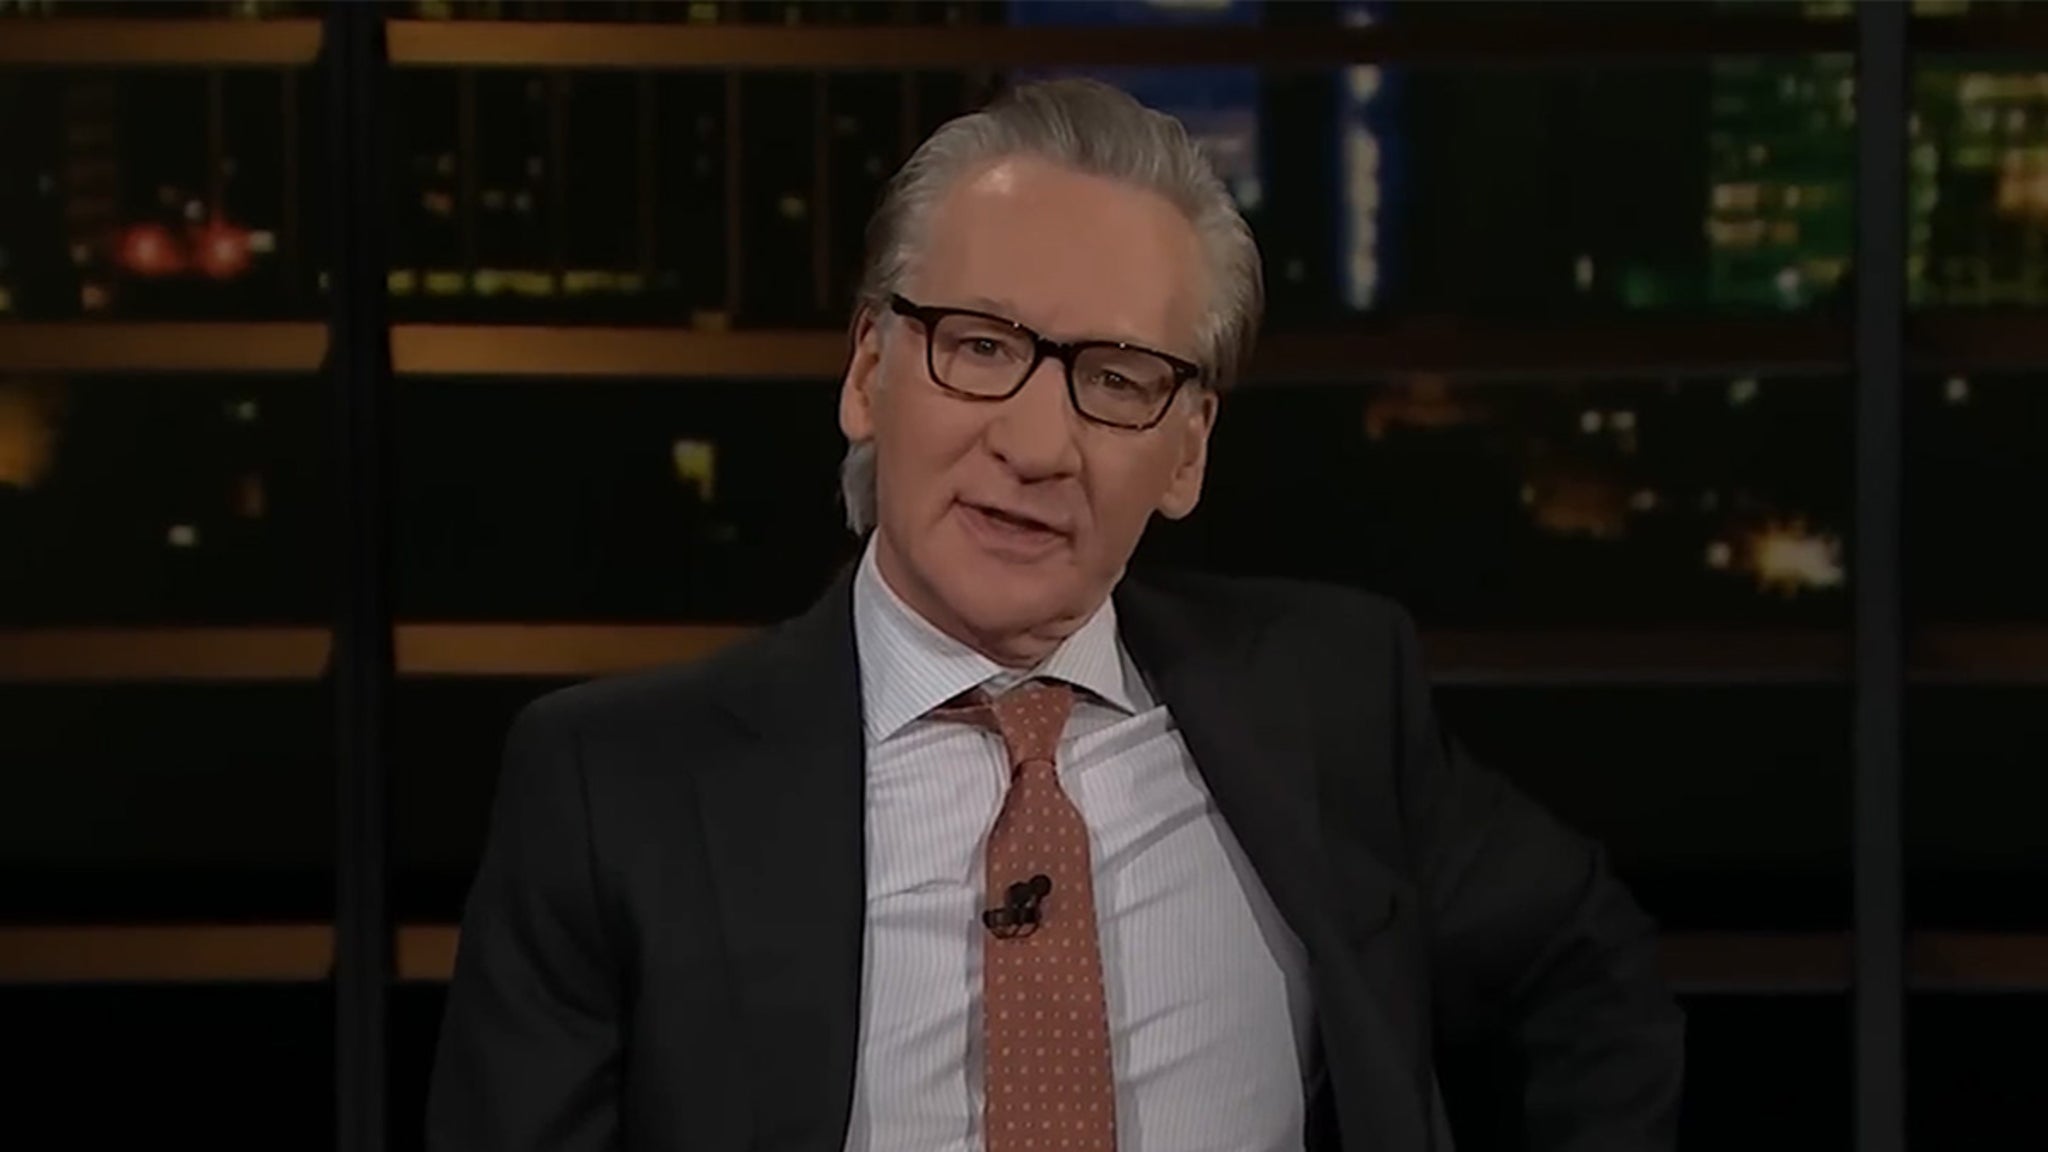 Bill Maher, Politics Should Be Like Movies, Stars Hate Each Other But Get Job Done